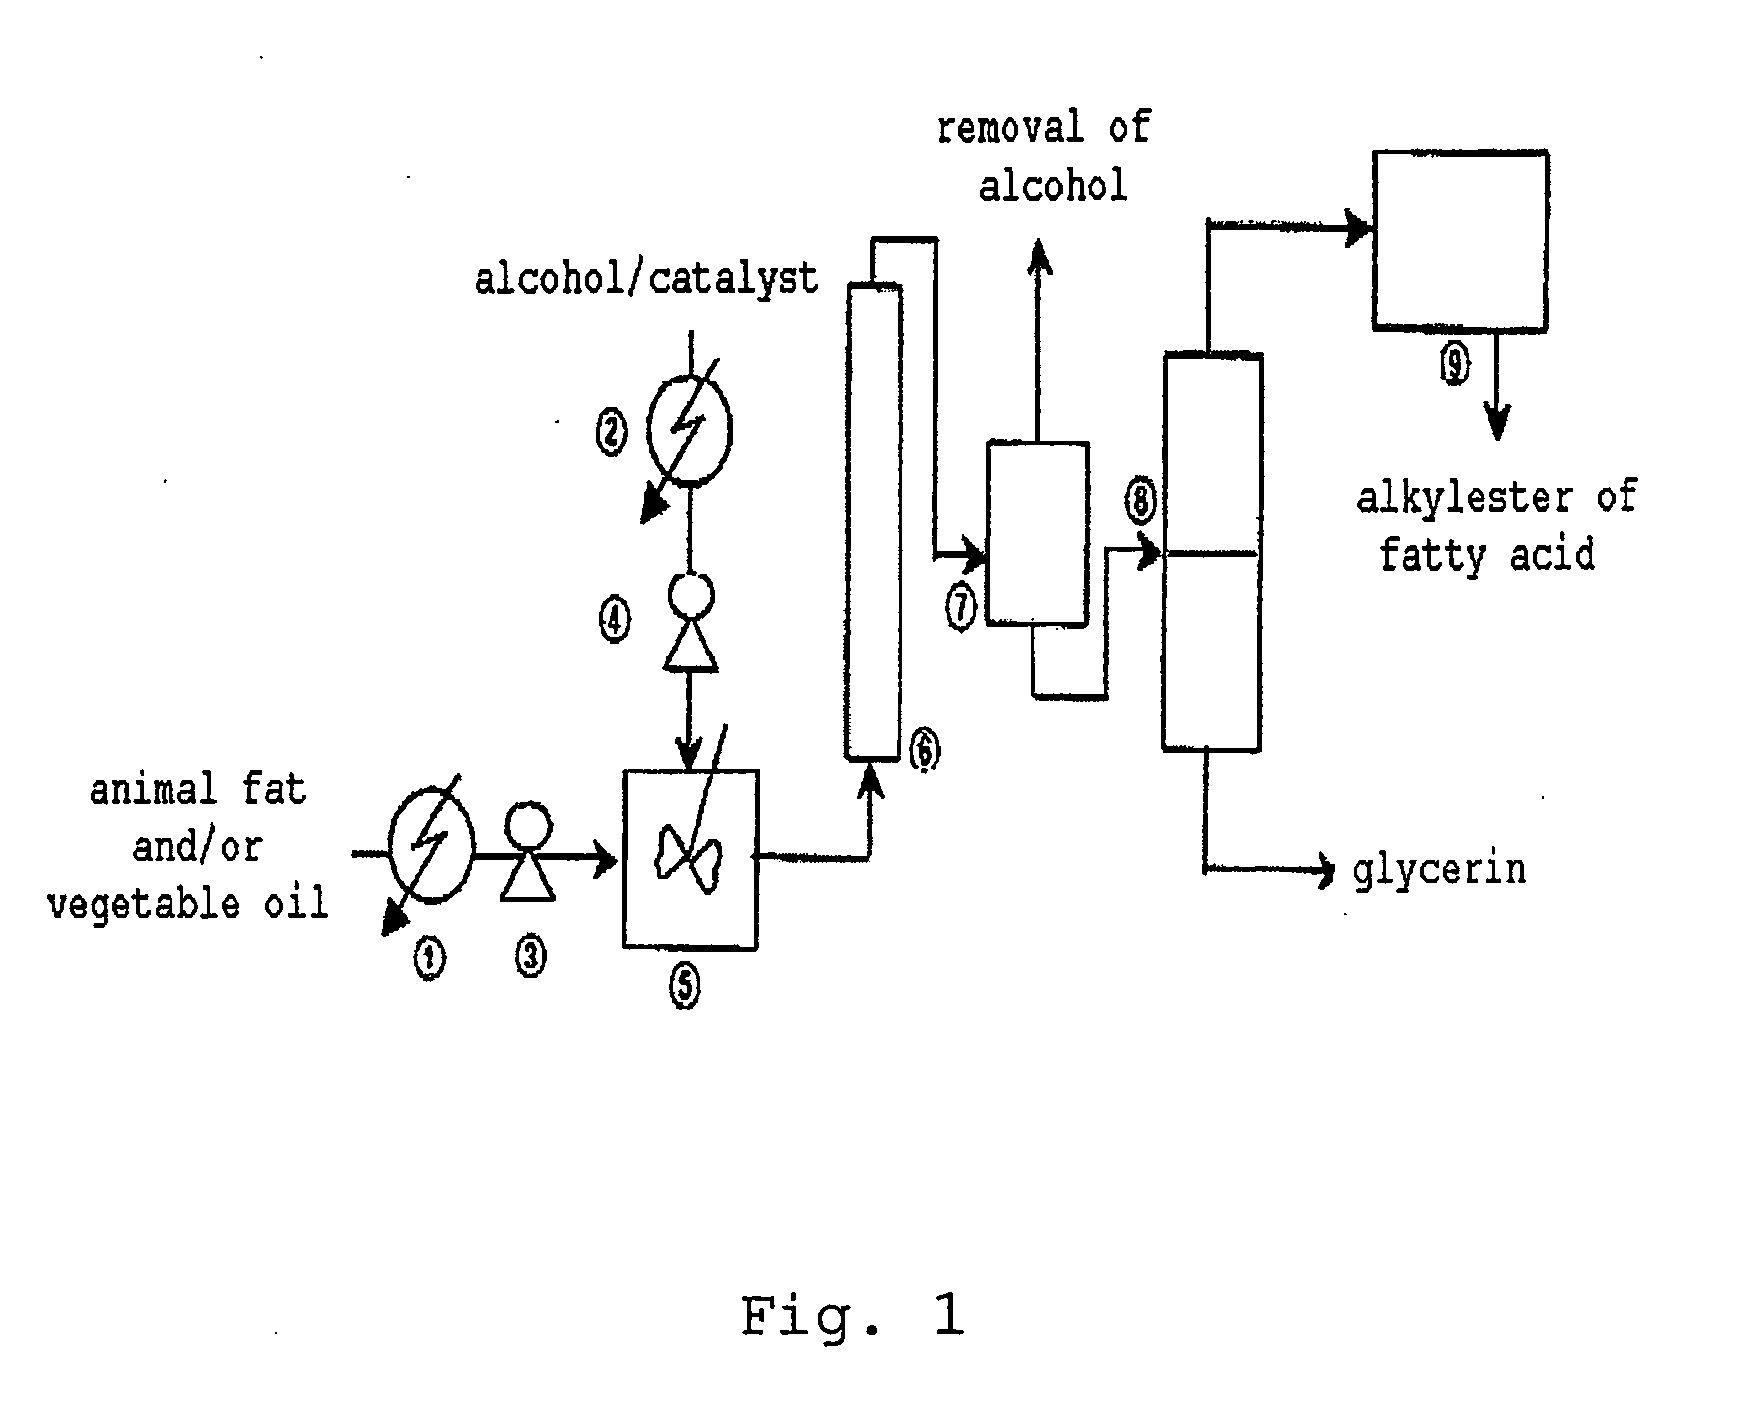 Process for producing alkylester of fatty acid in a single-phase continuous process